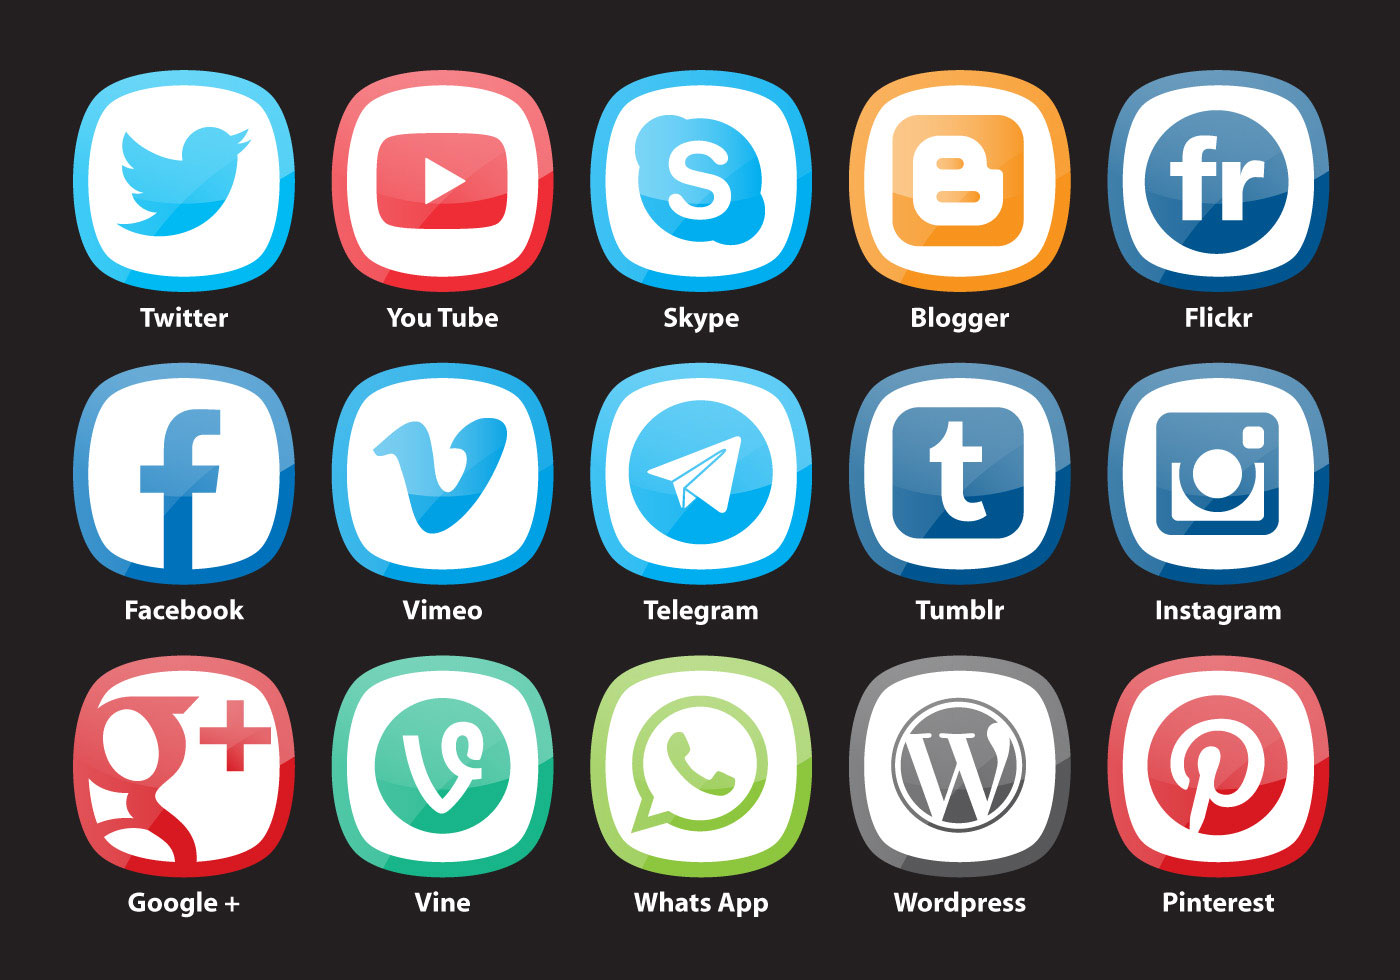 Rounded Square Social Media Vectors - Download Free Vector Art, Stock